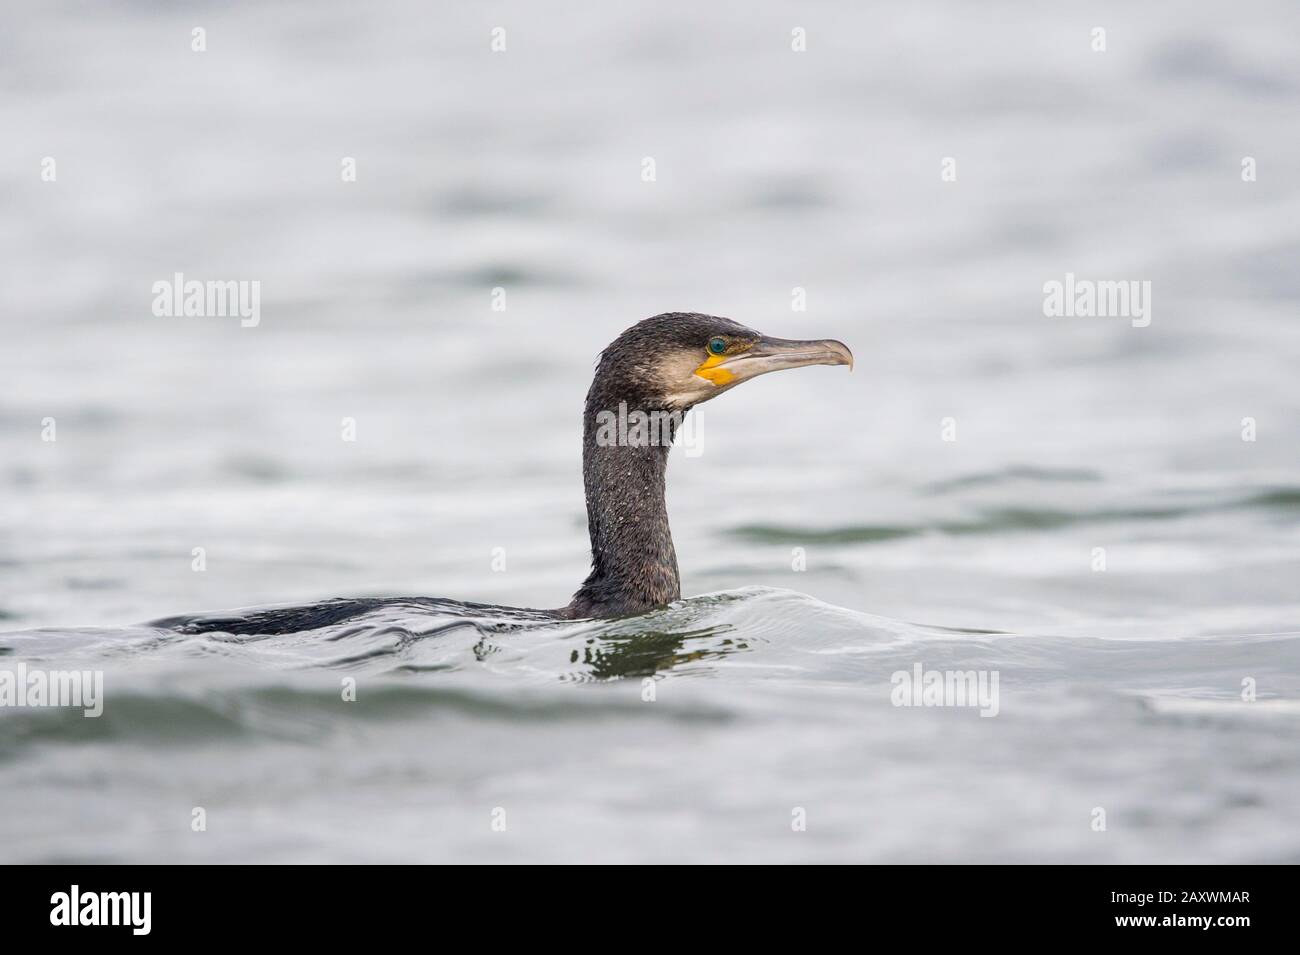 A Great Cormorant swims in the water in soft overcast light. Stock Photo